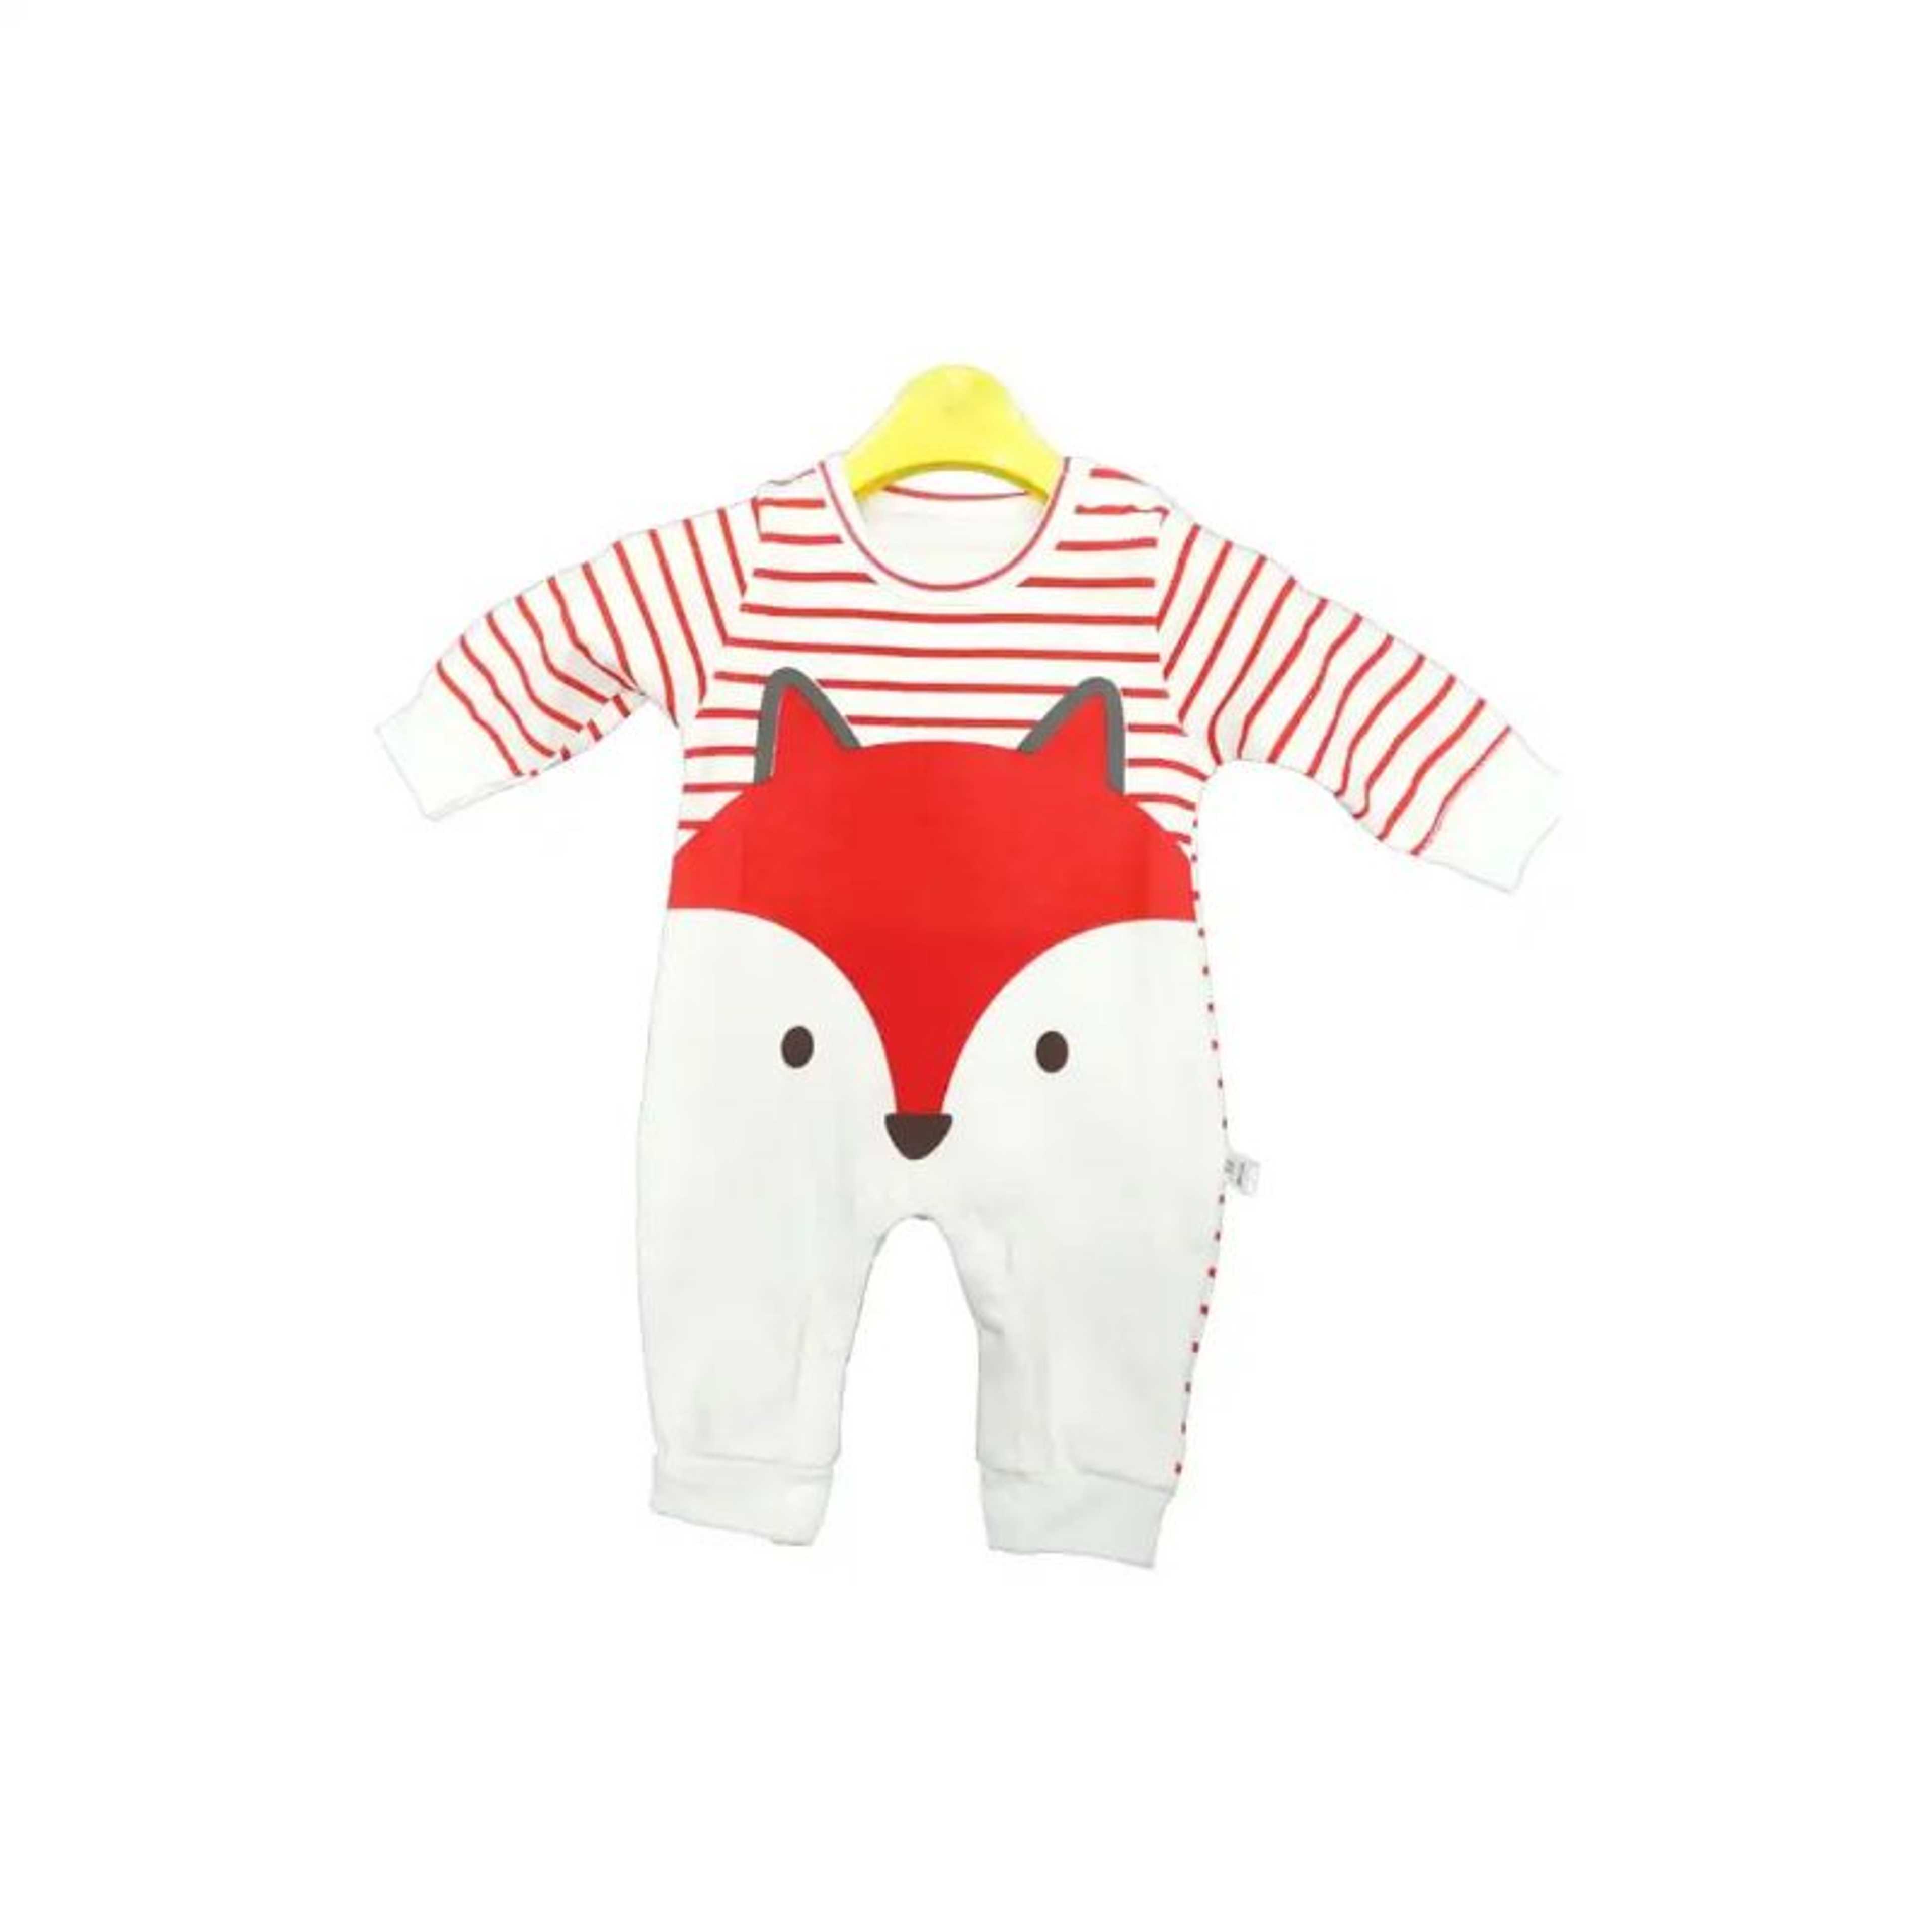 The red comfy Premium unisex baby Body Suit
